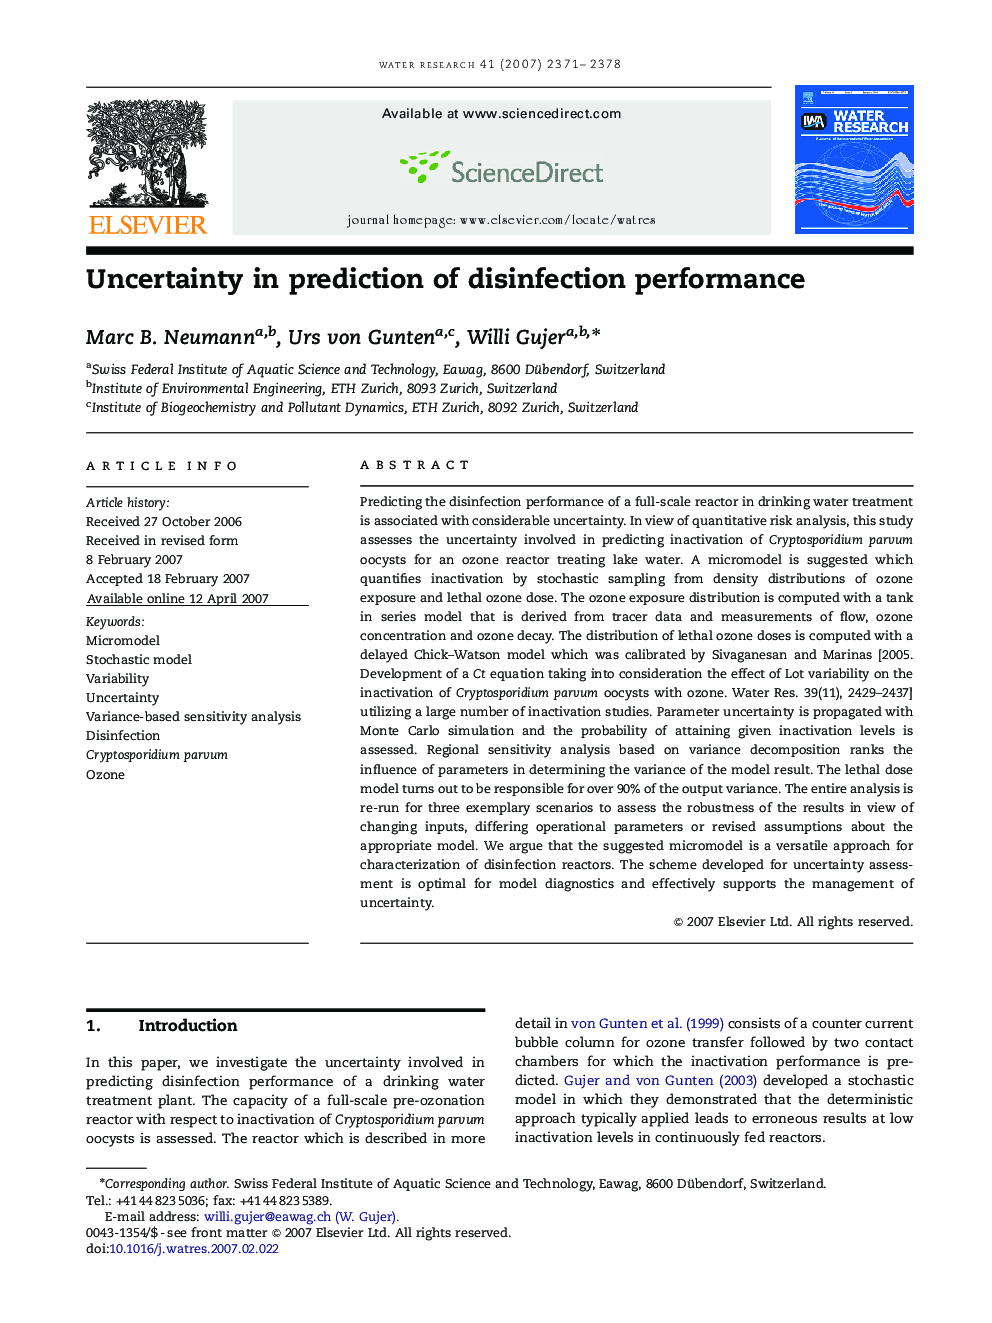 Uncertainty in prediction of disinfection performance